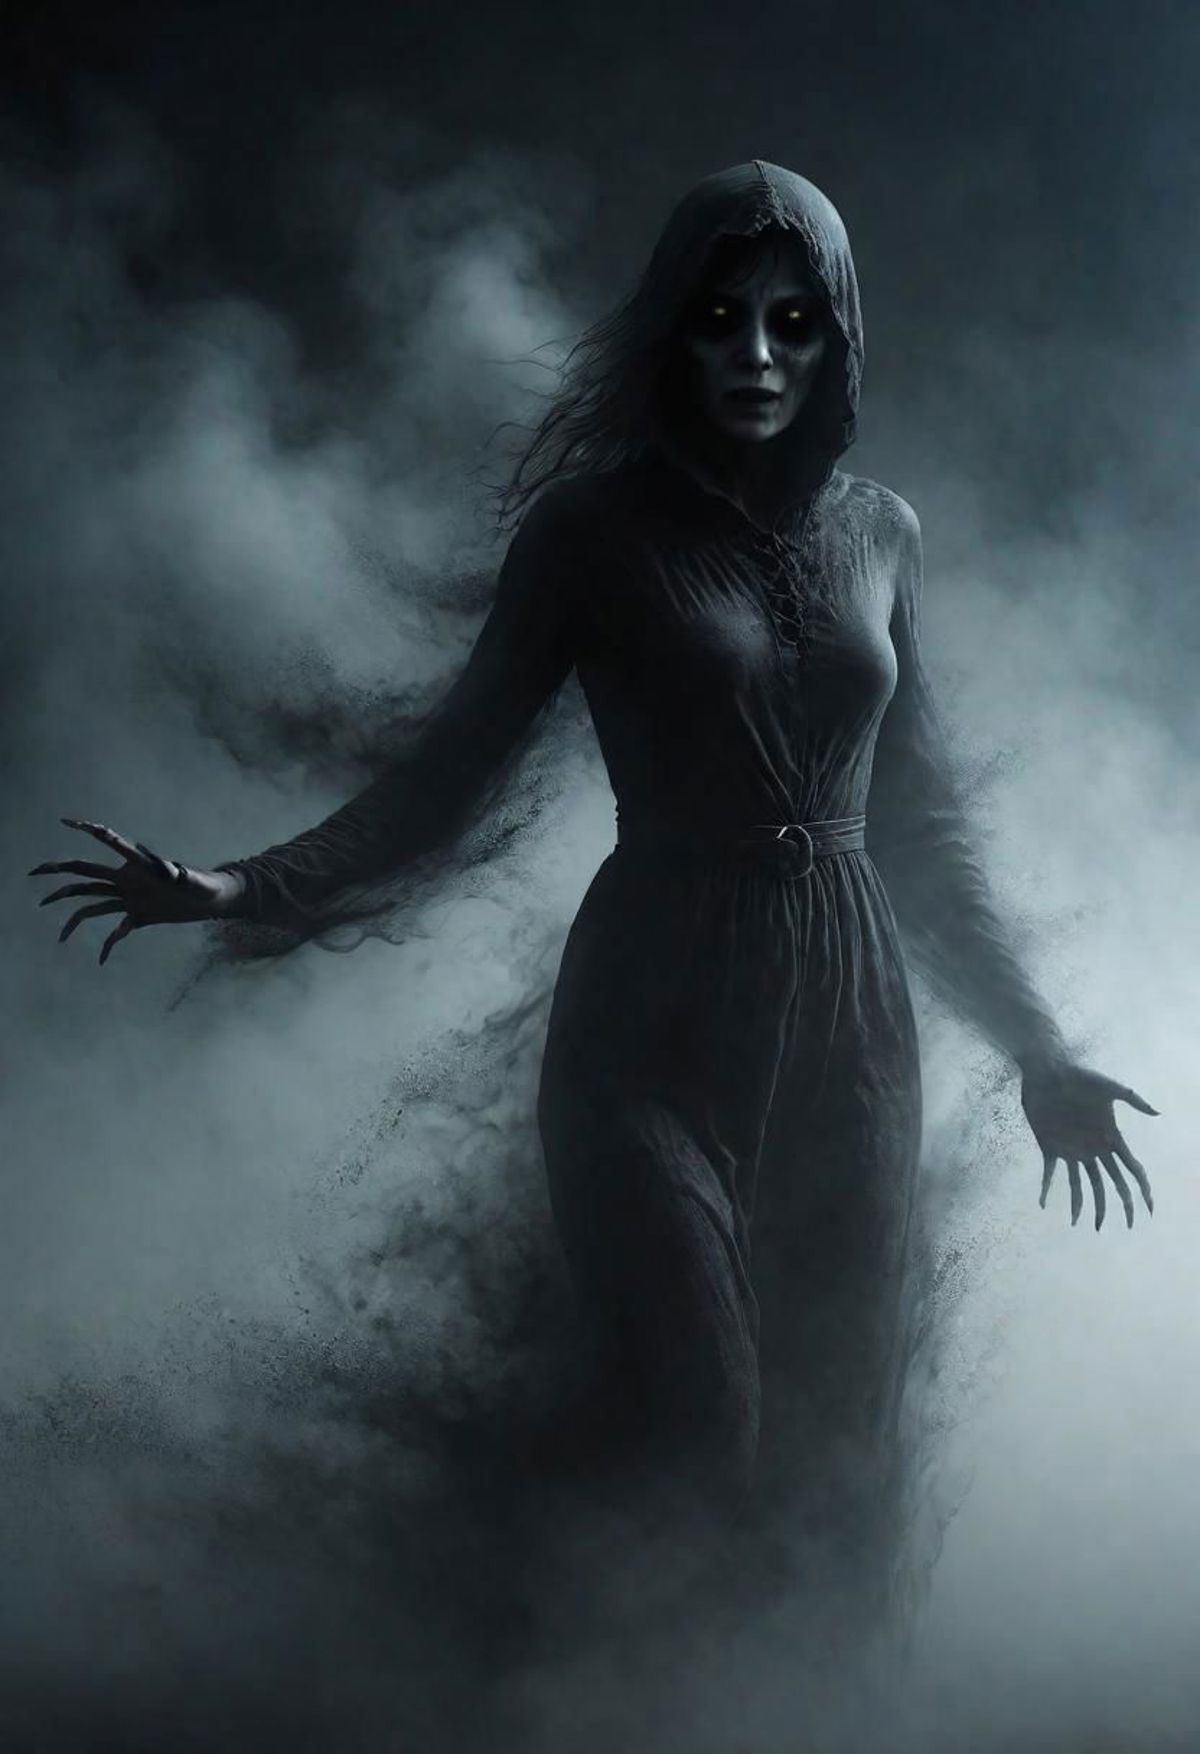 A woman dressed in a long black dress with a hood on her head, standing in a dark, foggy environment.